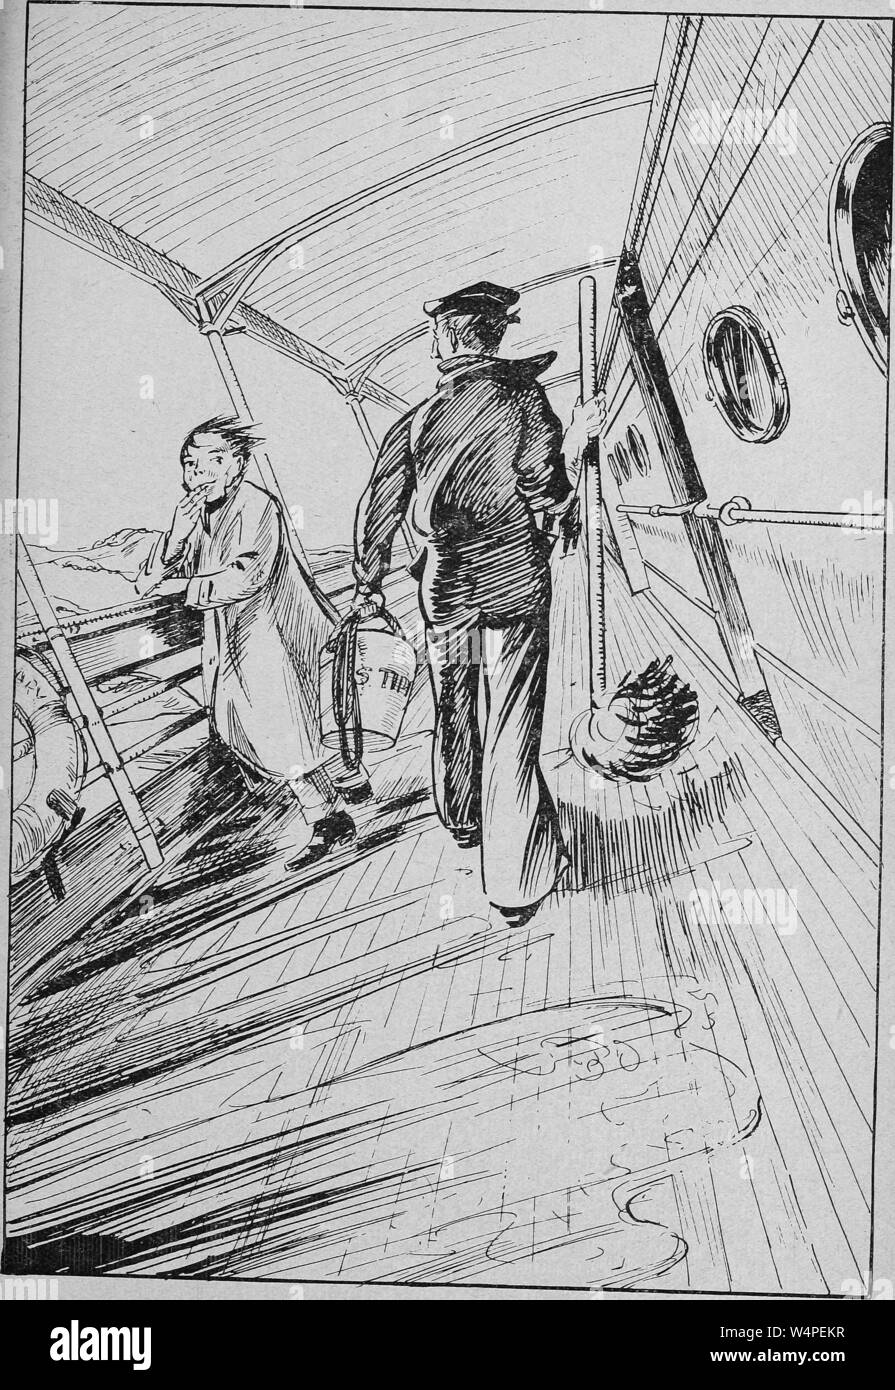 Engraved illustration 'sick but happy', the passenger with seasickness talking to the sailor, from the 'Ruhleben camp magazine', April, 1916. Courtesy Internet Archive. () Stock Photo